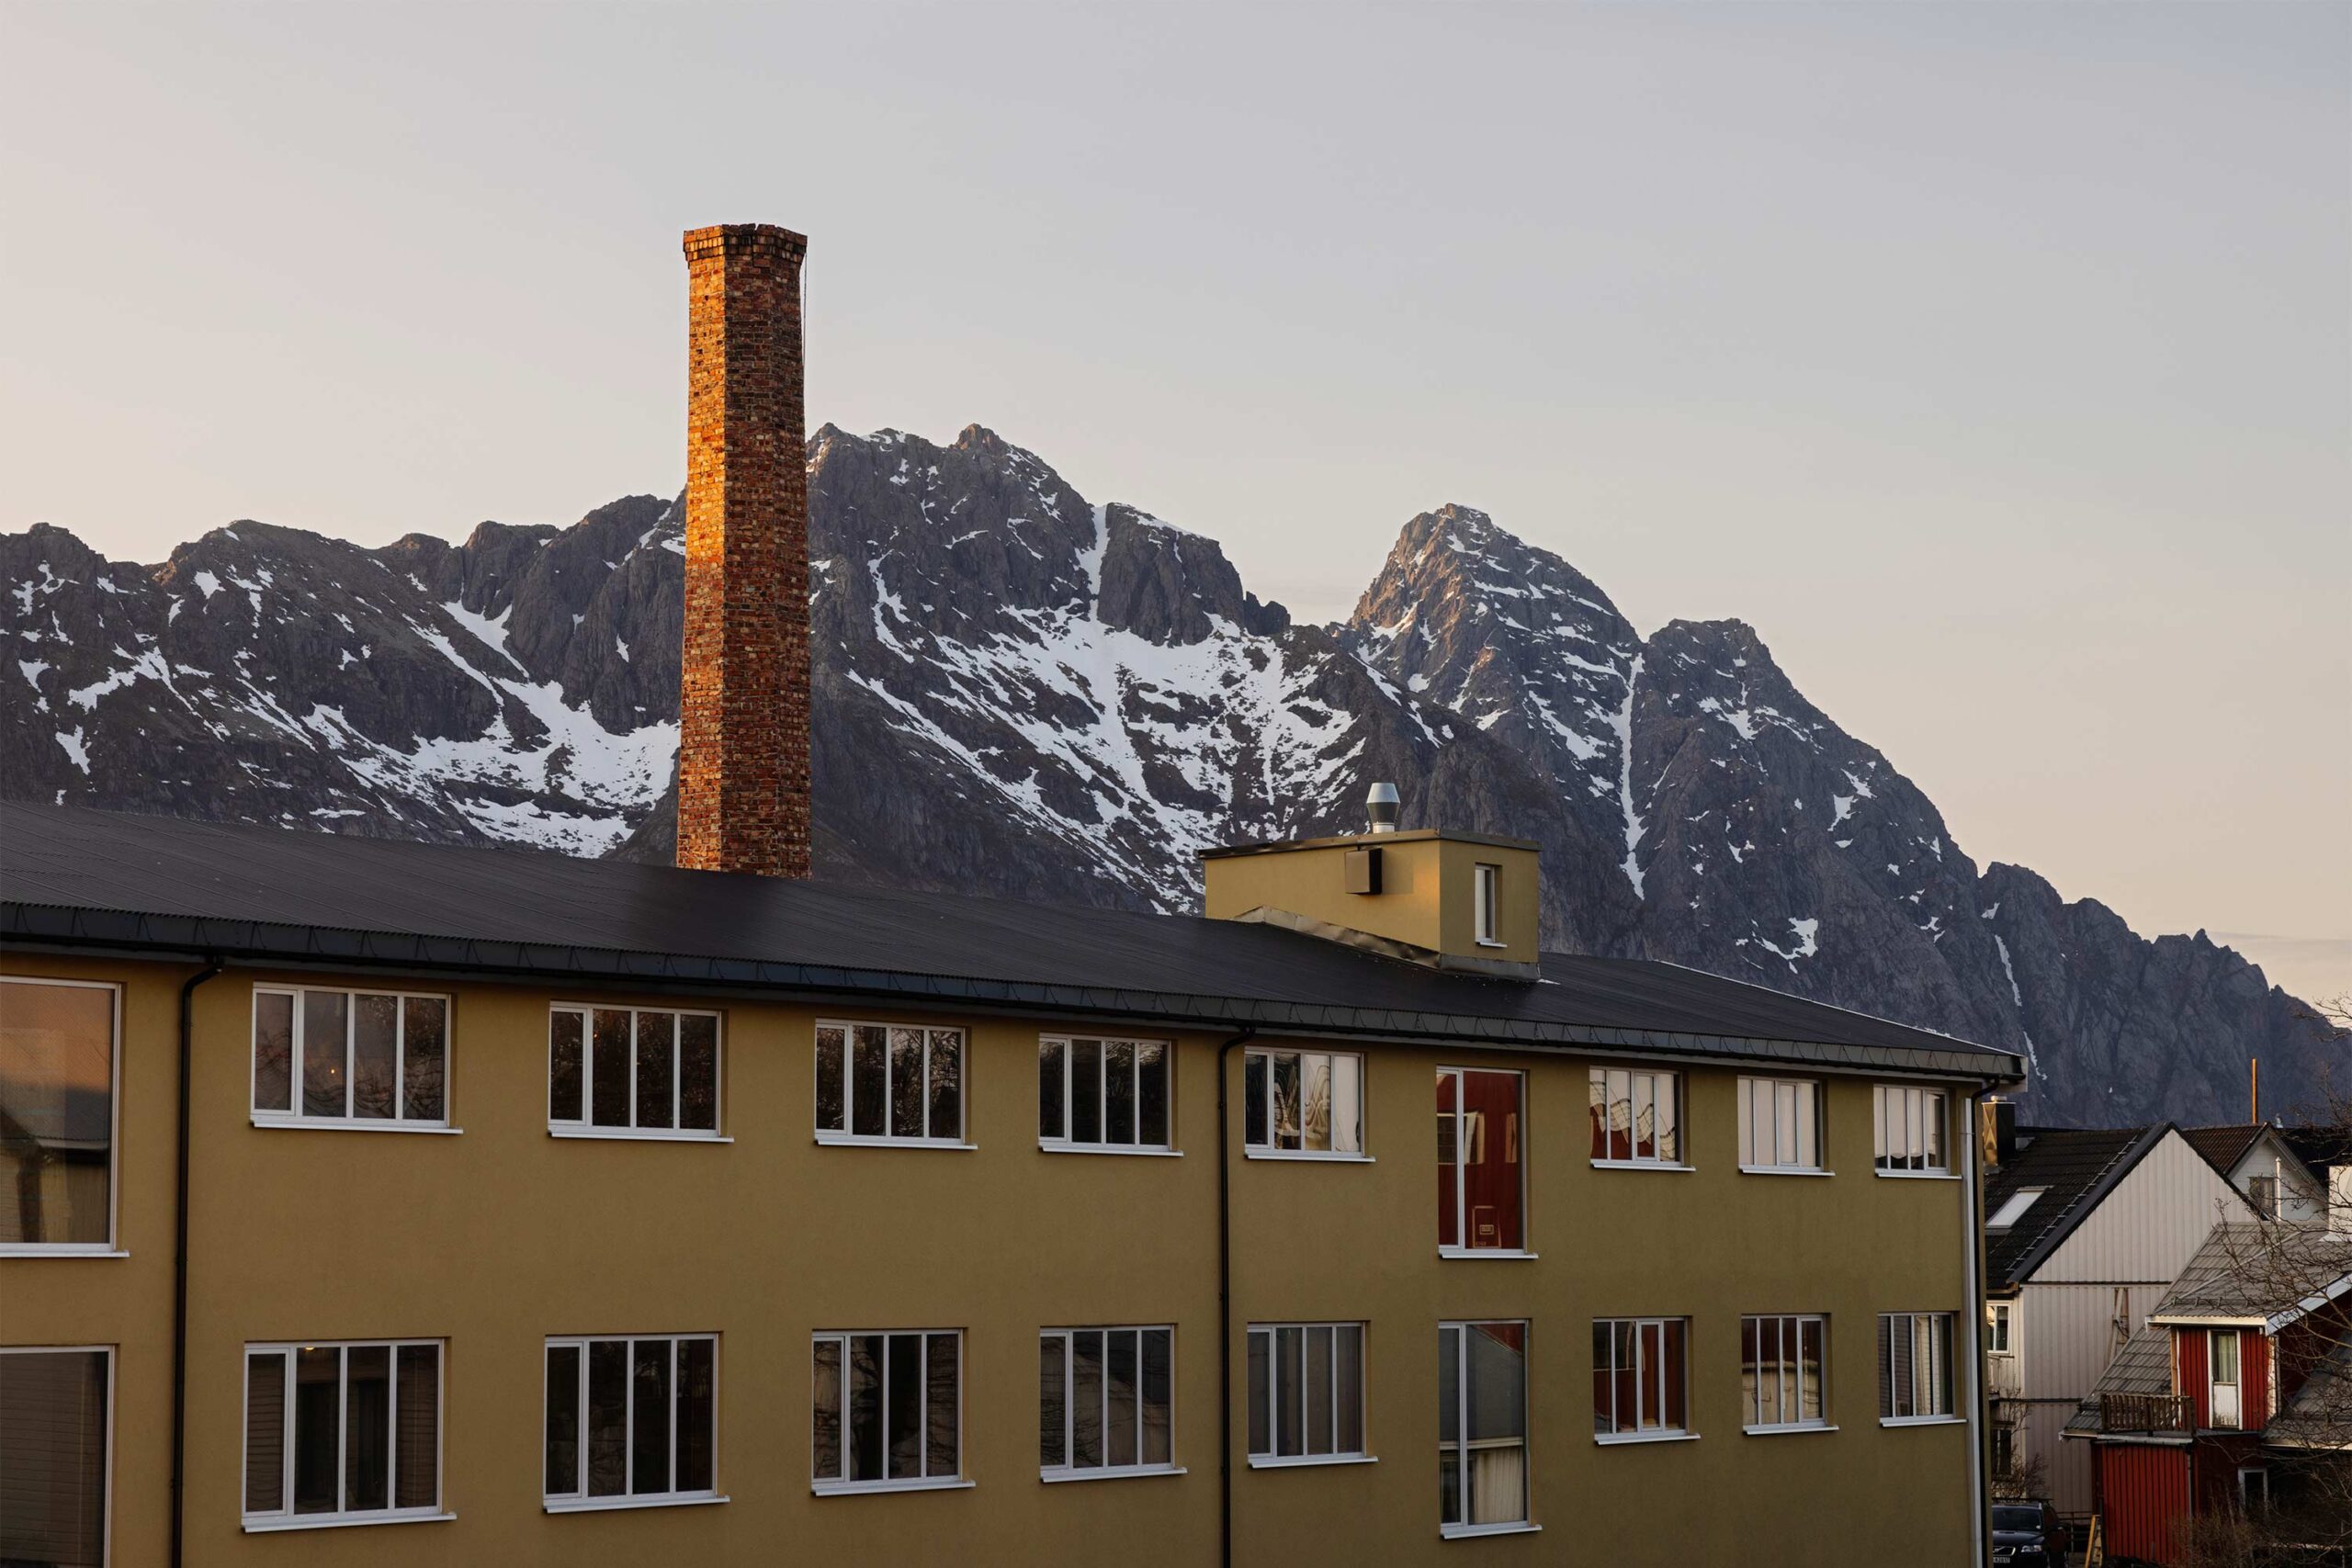 The newly insulated building surrounded by the mountains of Lofoten.